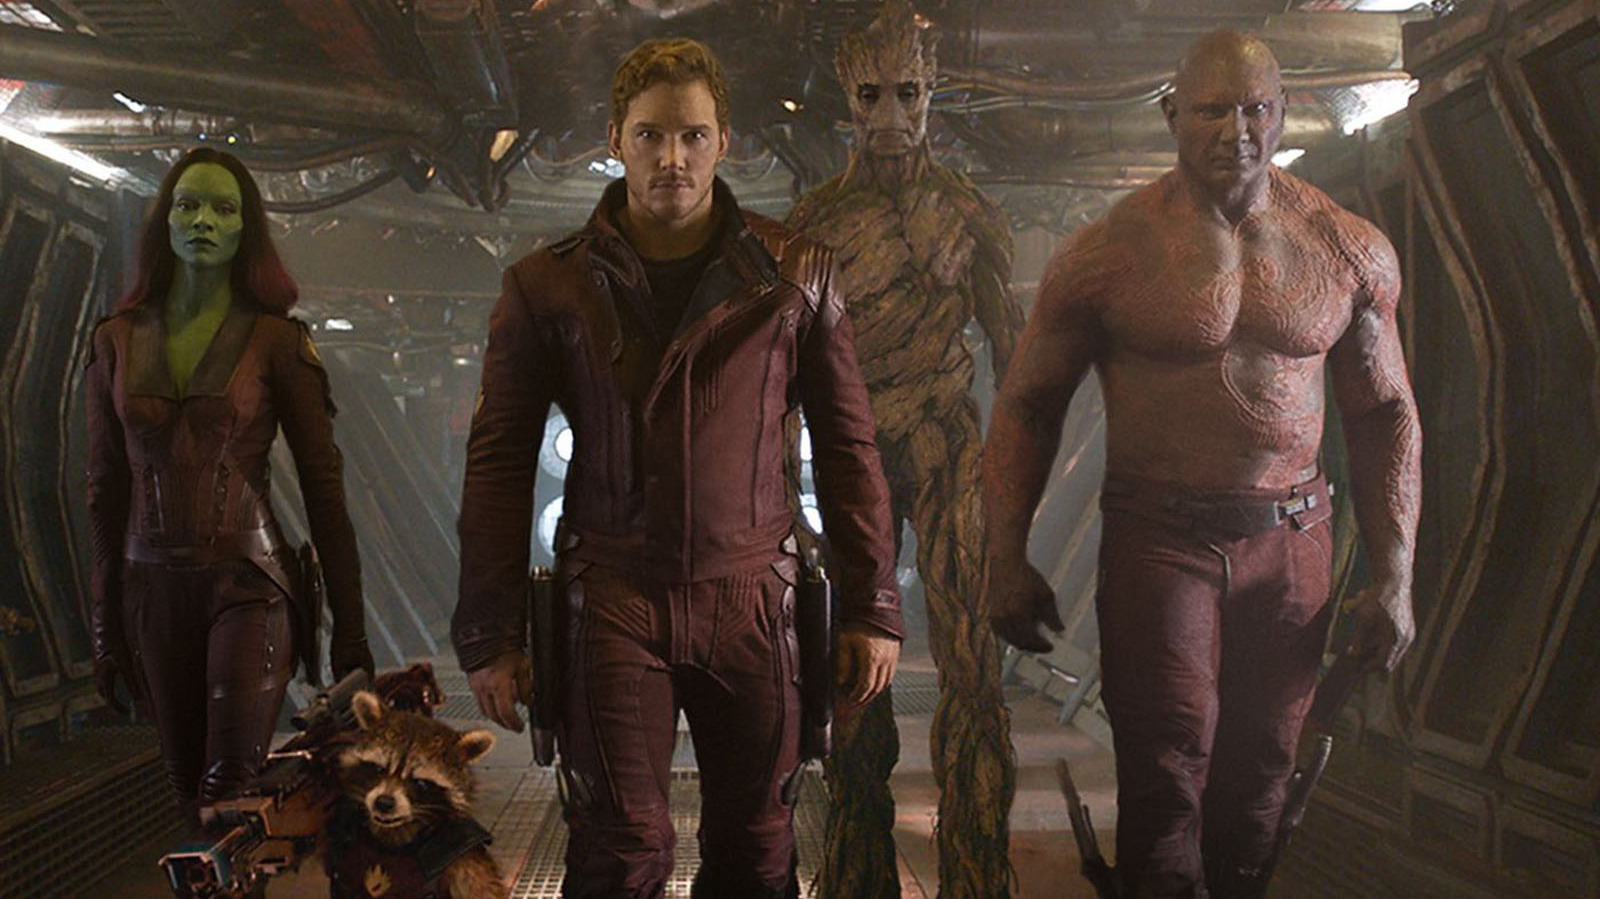 #Guardians Of The Galaxy Vol. 3 Just Set A World Record, And It’s Not Even Done Filming Yet